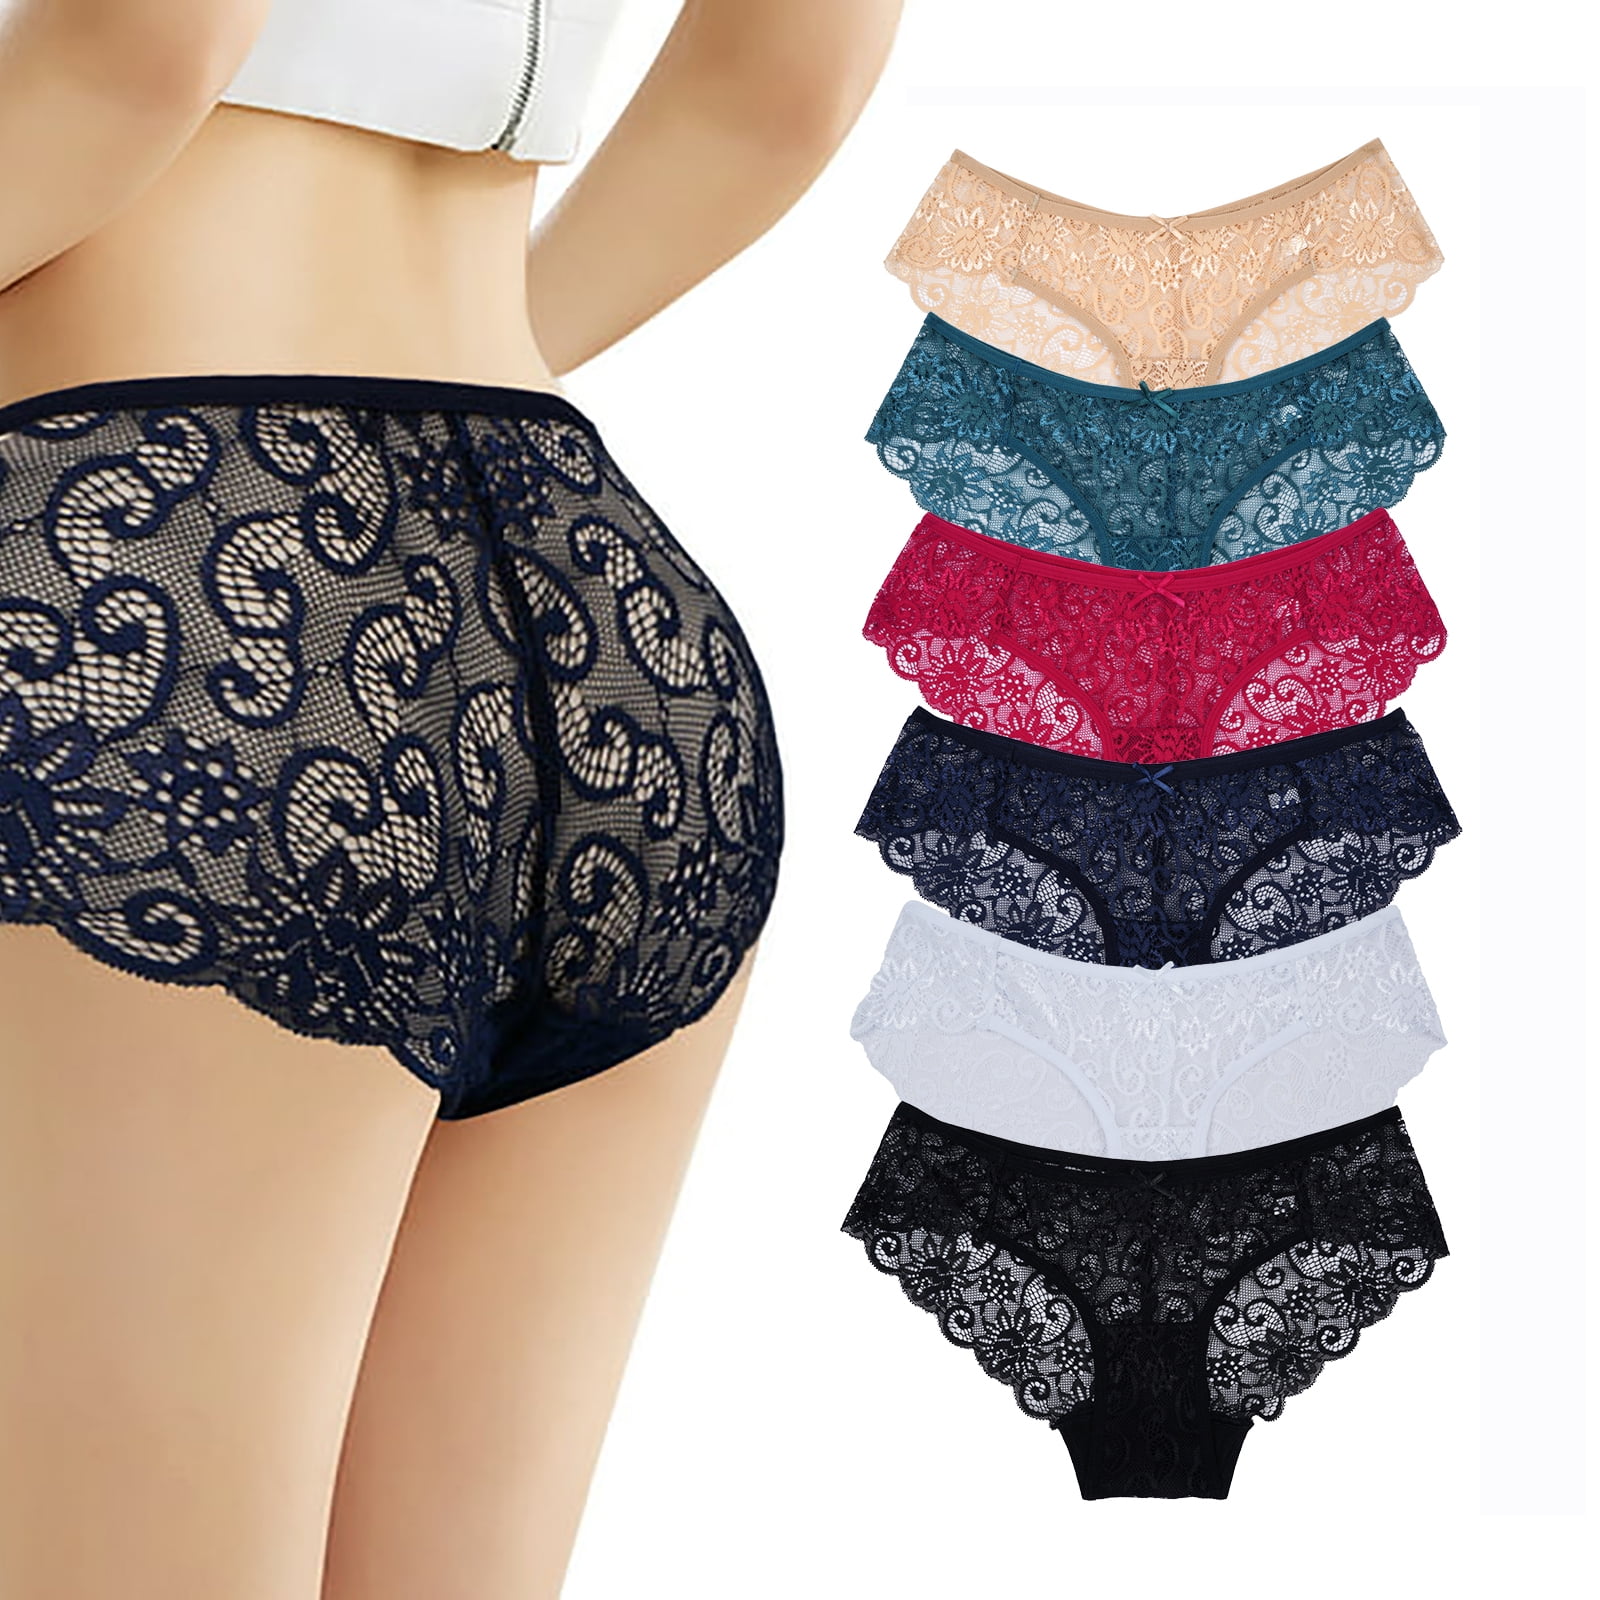 Sunm Boutique Lace Panties Cotton Underwear for Women Plus Size Cheeky  Panties for women Hipster 6 pack 